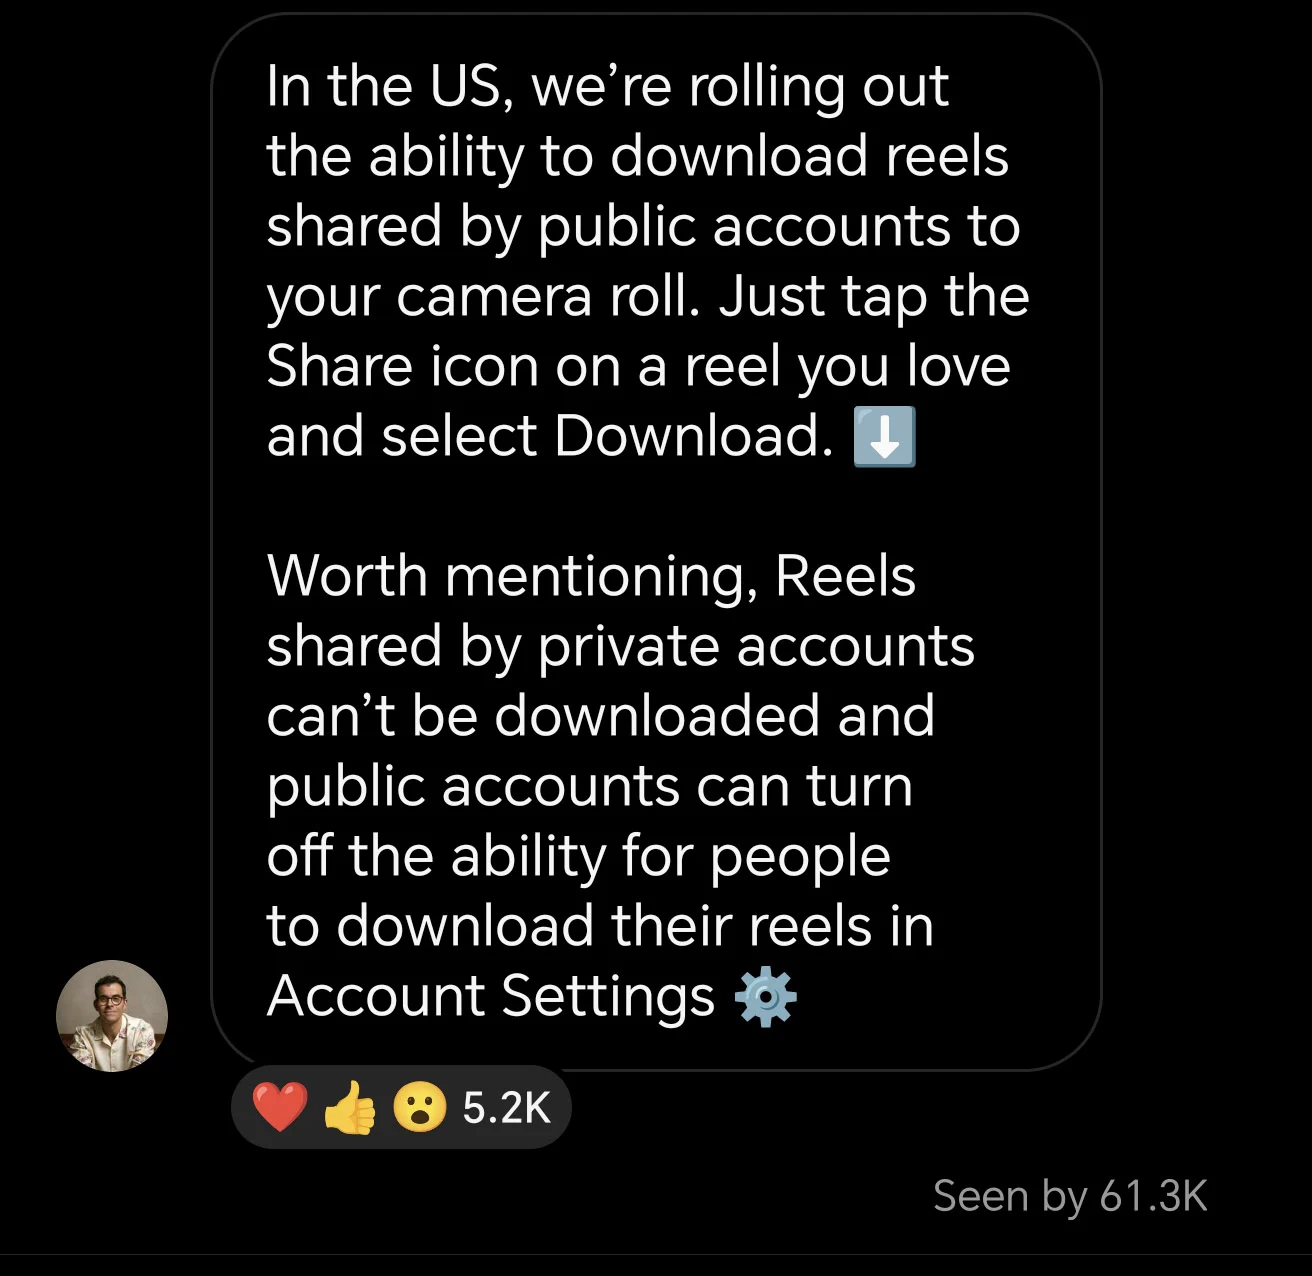 Instagram now lets users download Reels to their smartphones